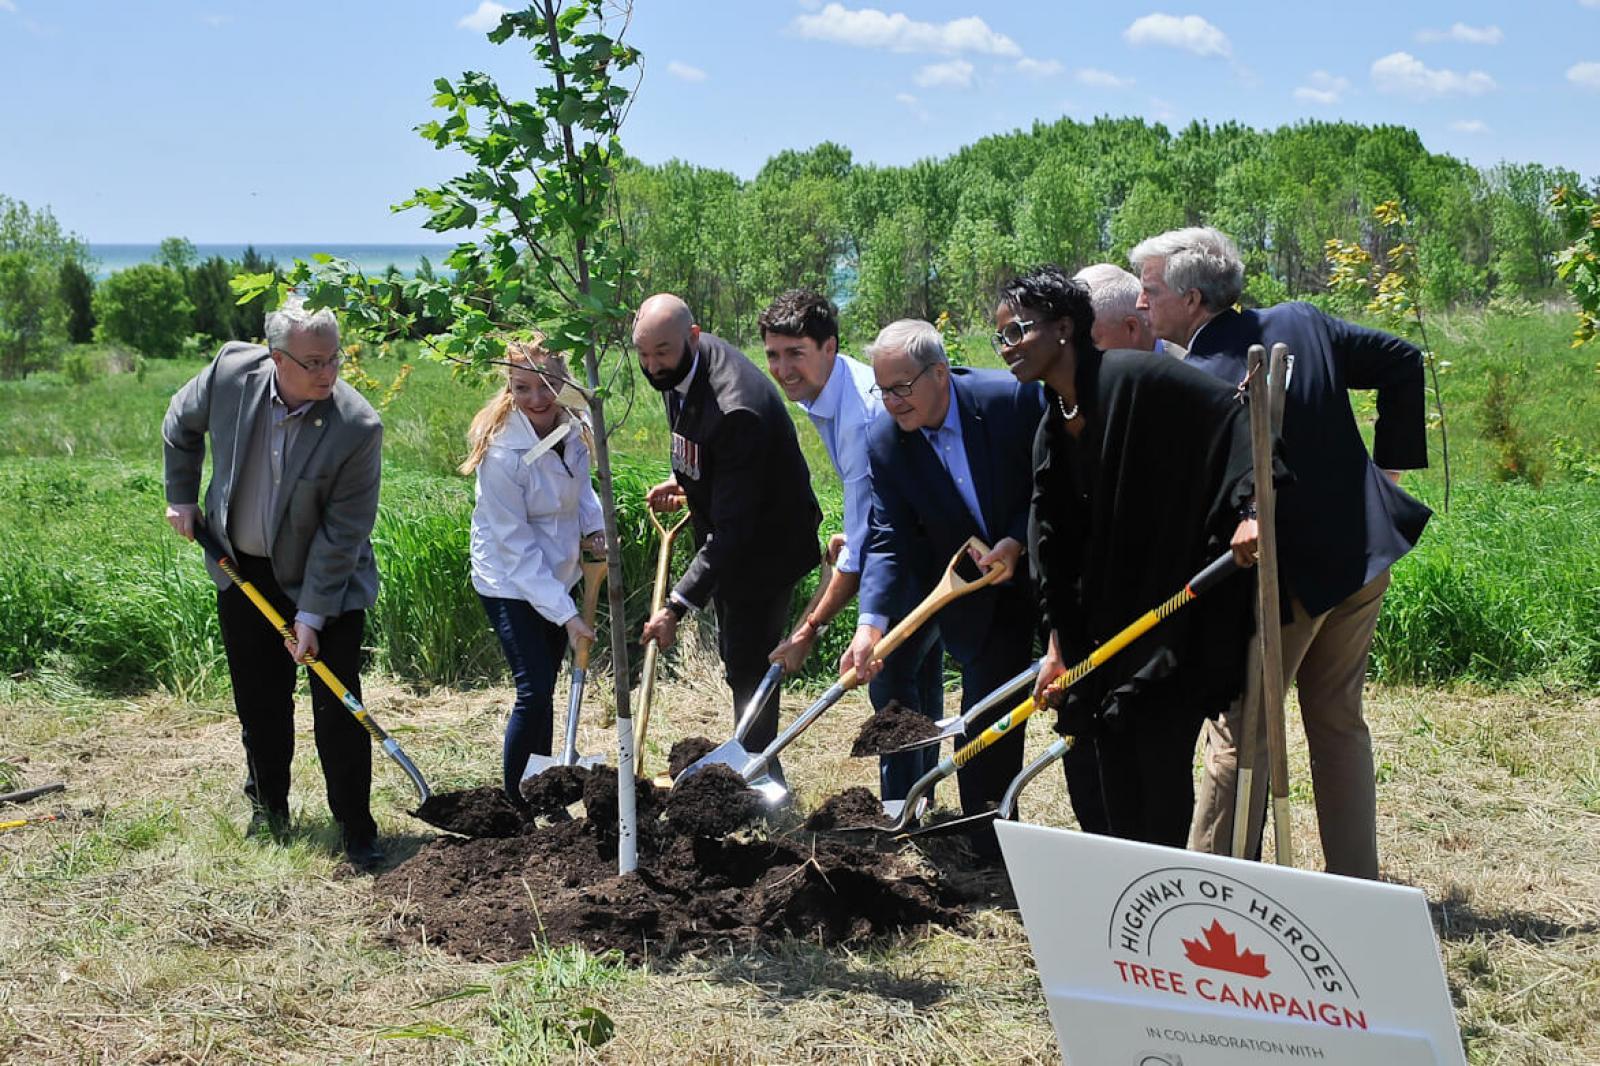 Prime Minister Justin Trudeau was joined by numerous special guests for a ceremonial tree planting.